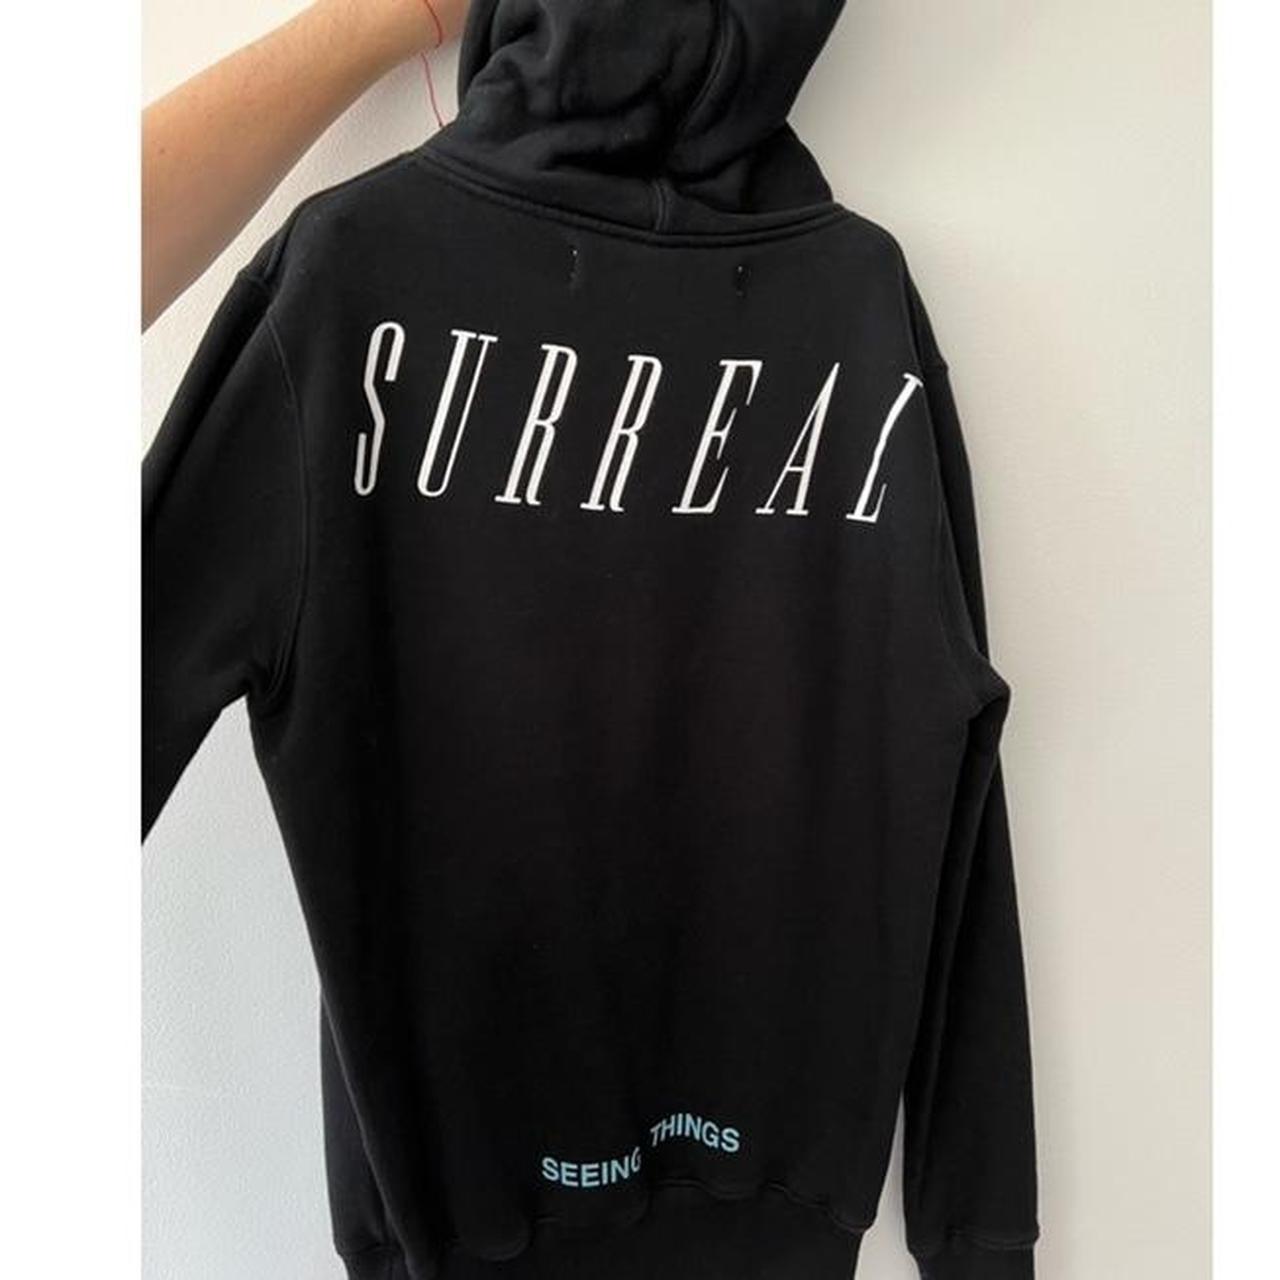 Off white surreal hoodie🖤 Never Open to... - Depop